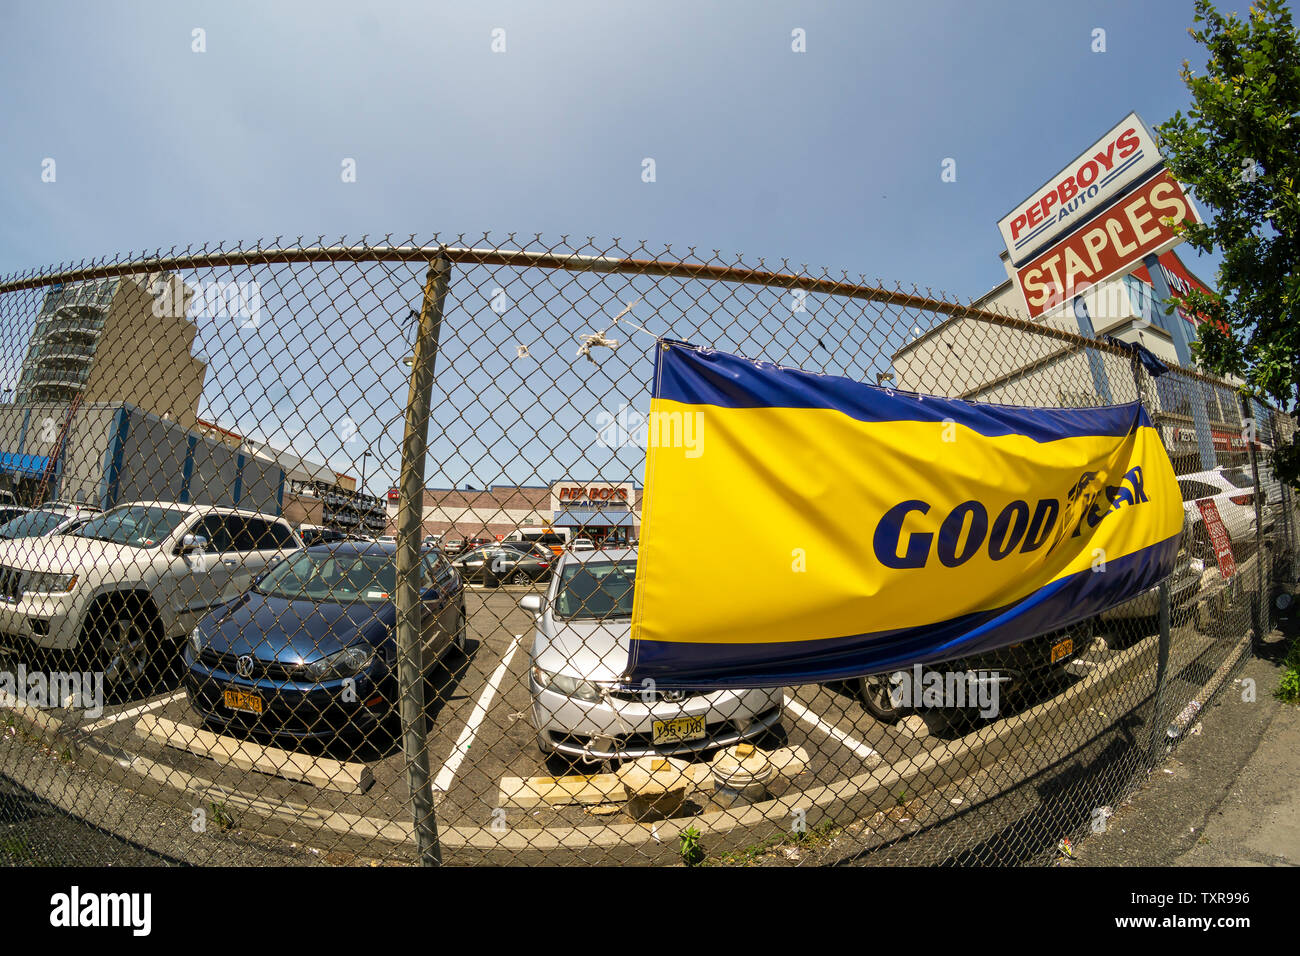 A sign advertising Goodyear tires outside of a Pep Boys auto parts store in the Park Slope neighborhood of Brooklyn in New York on Sunday, June 23, 2019. The Philadelphia based chain is known for its mascots Manny, Moe & Jack and has over 700 stores. (© Richard B. Levine) Stock Photo